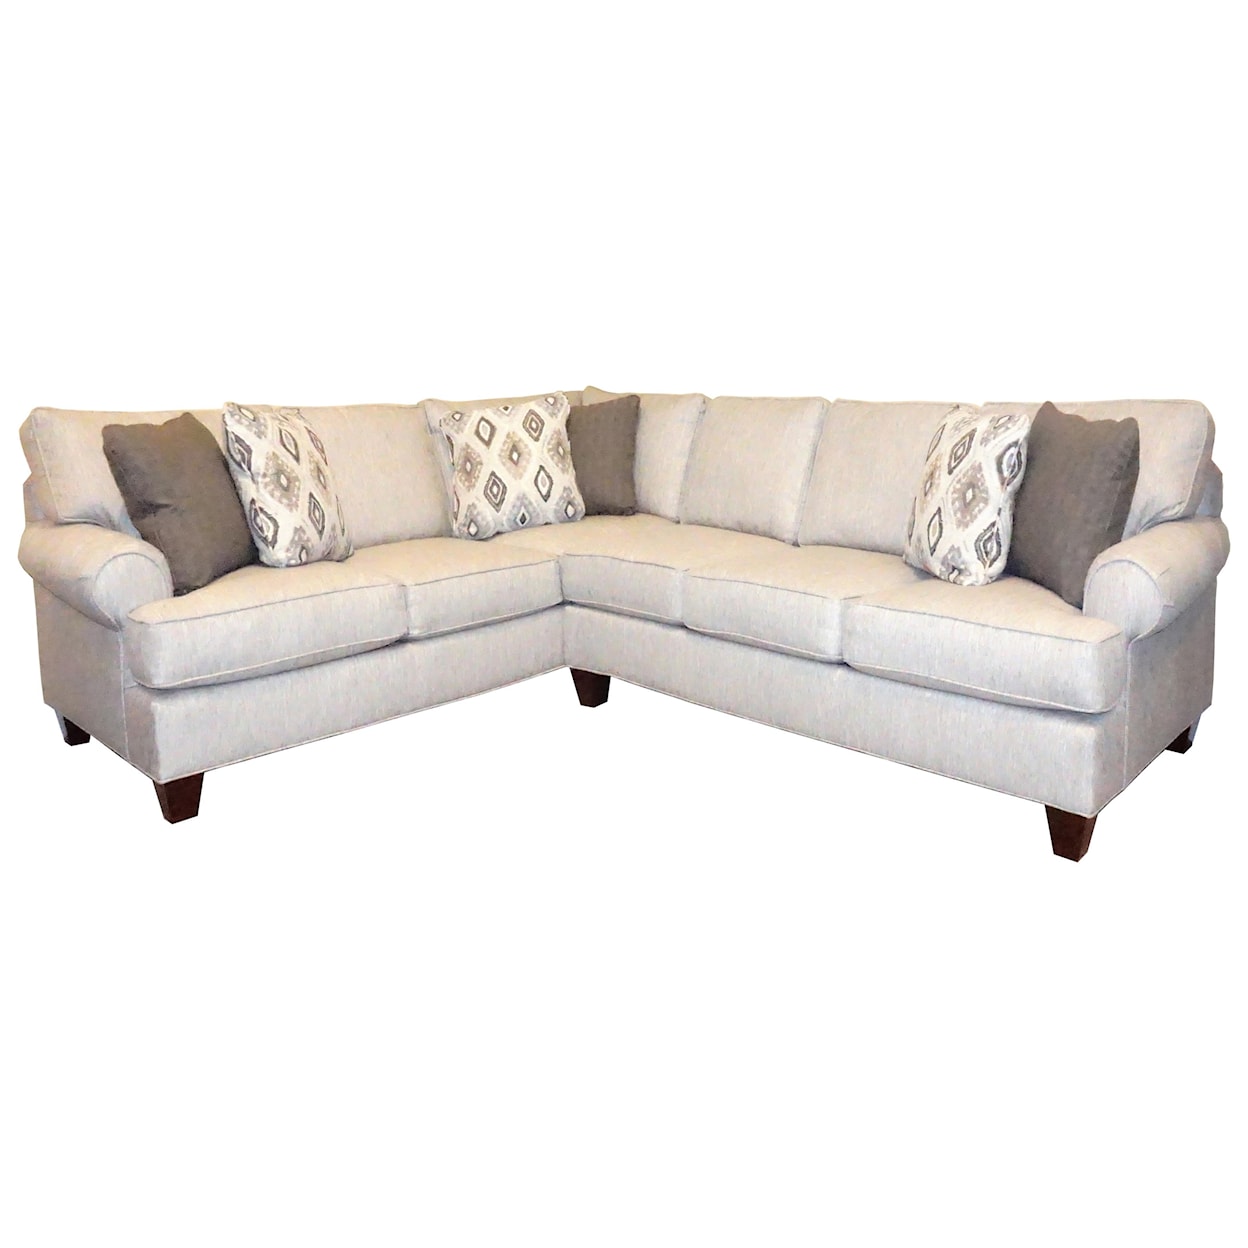 Hickory Craft C9 Custom Collection 2 Pc Sectional Sofa